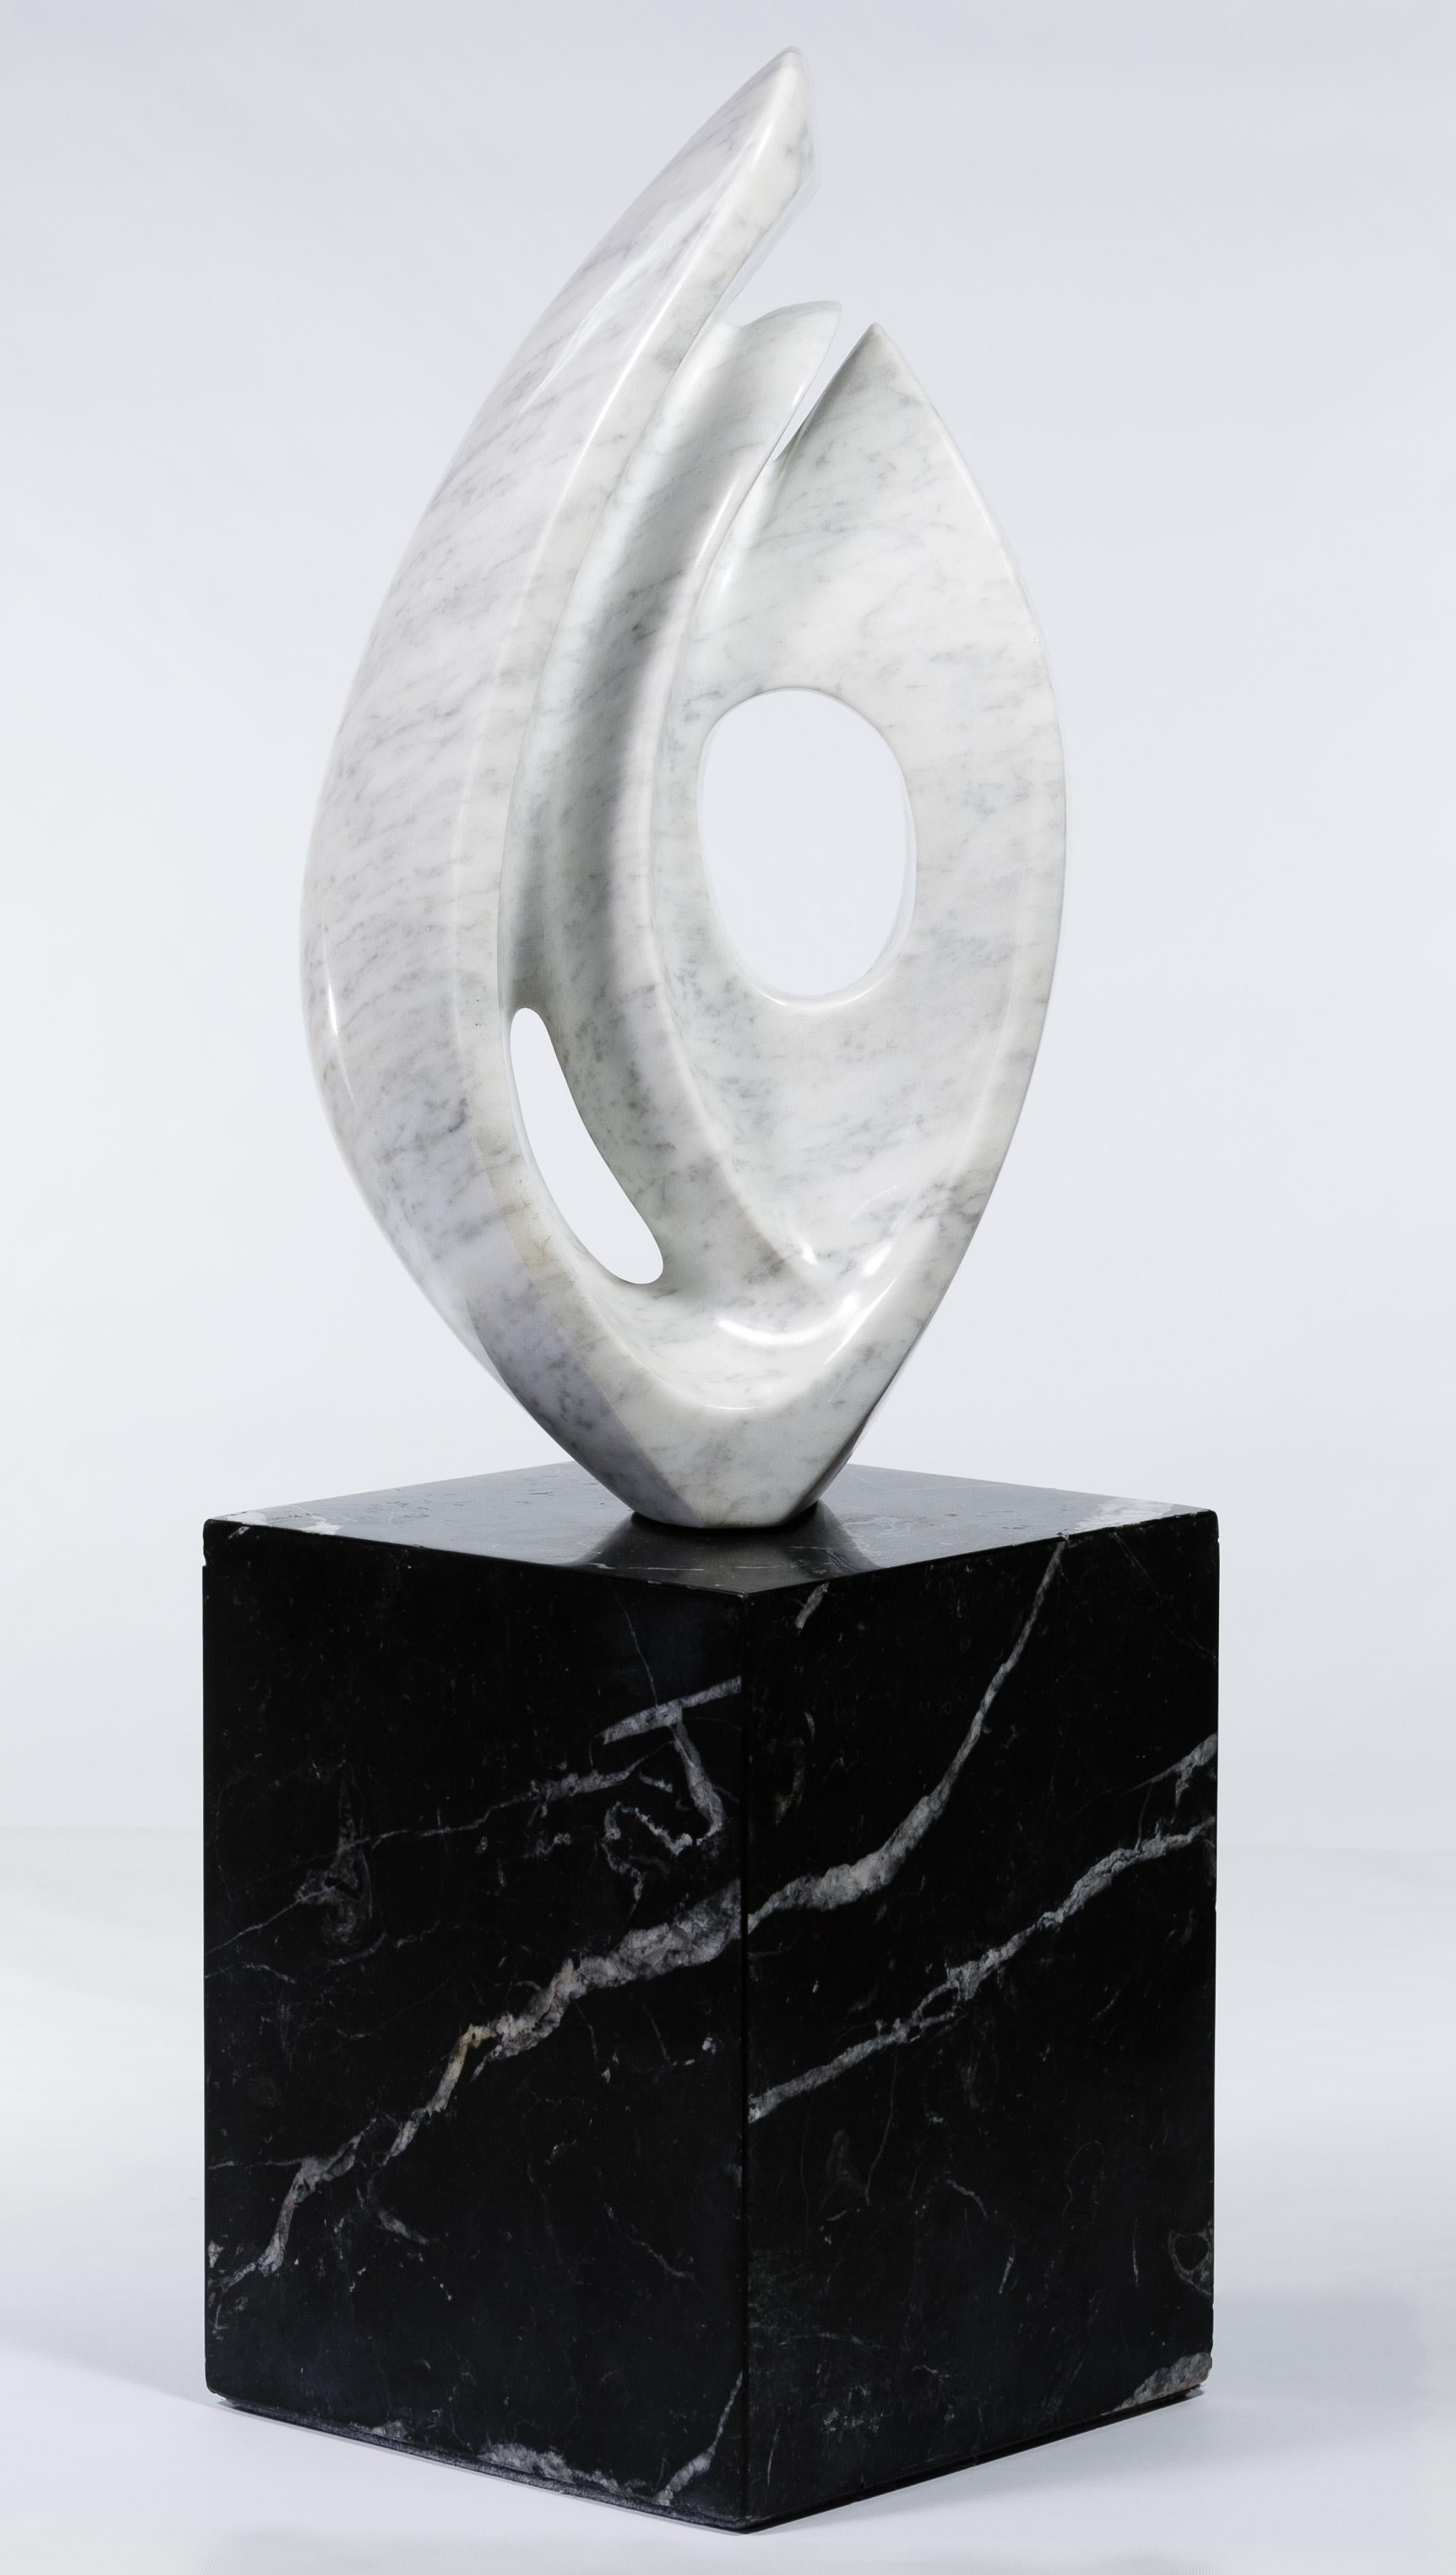 The Sculpture in excellent condition sculpted from marble, some slight ware on the marble base, consistent with age. Signed on base and initialed on sculpture. With certificate of authenticity from Casa a Marela.

(13 August 1905, Mococa – 1993,